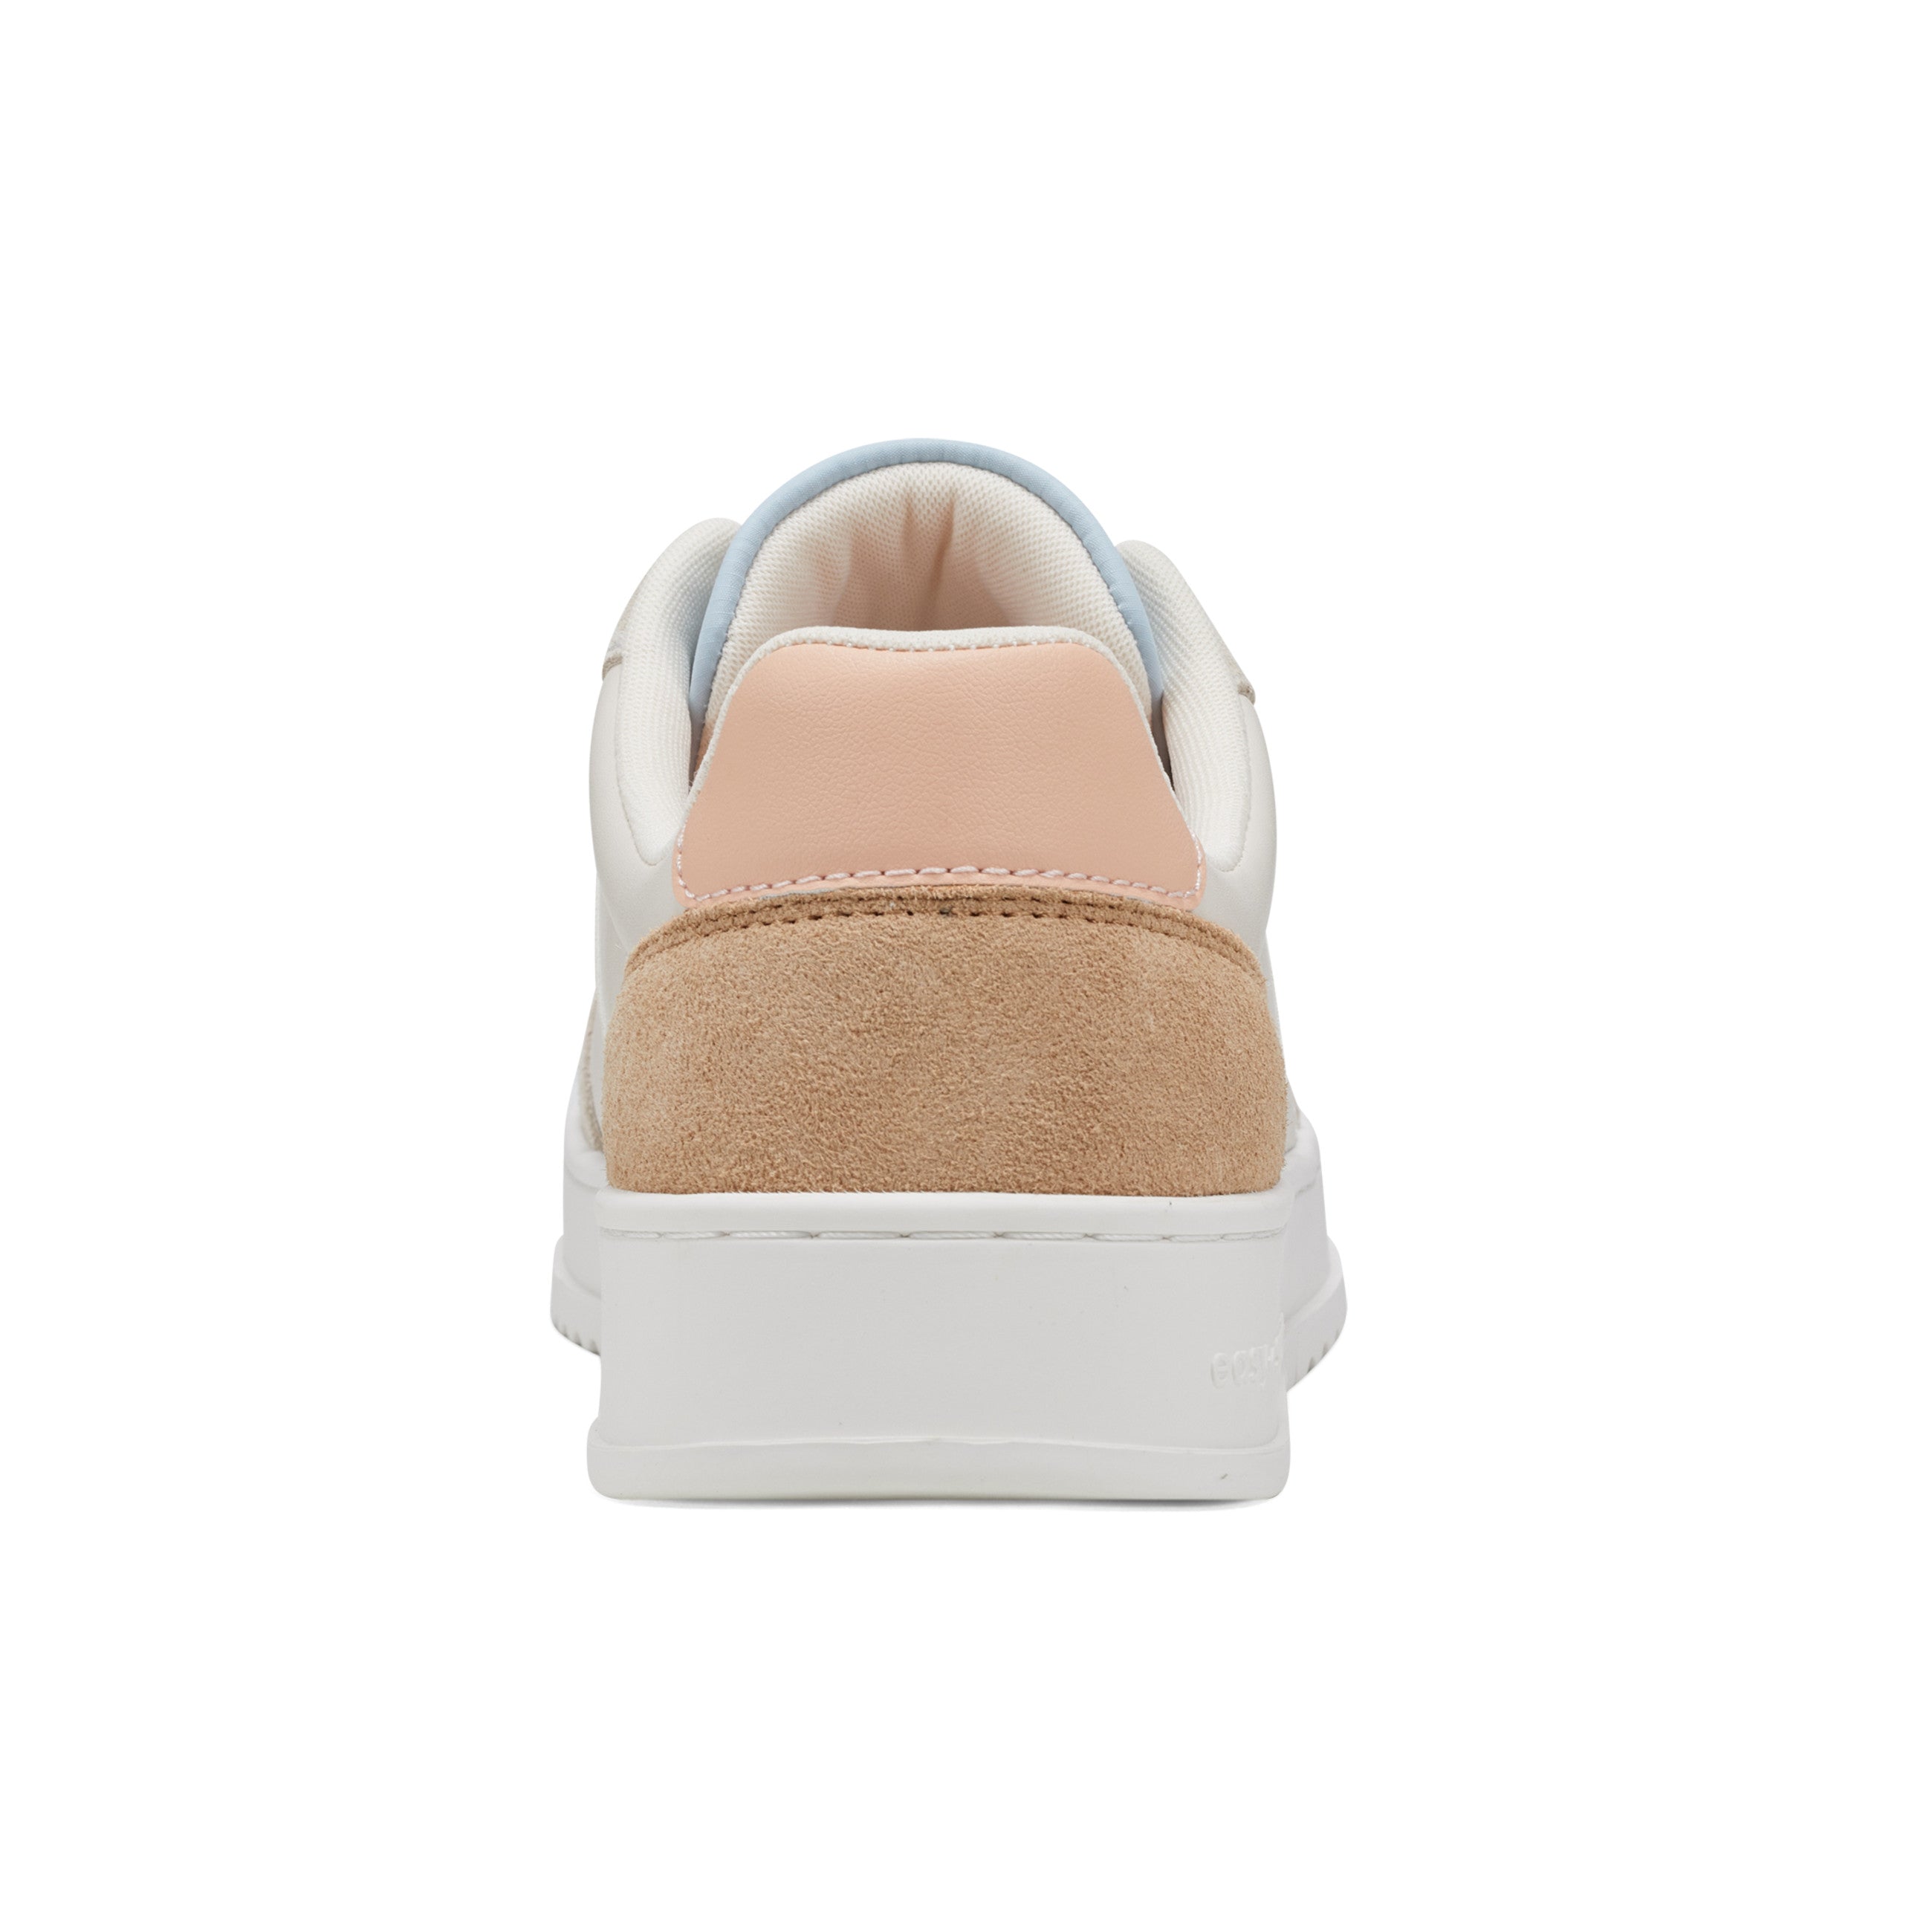 Spirit – Up Sneakers Merci Easy Lace